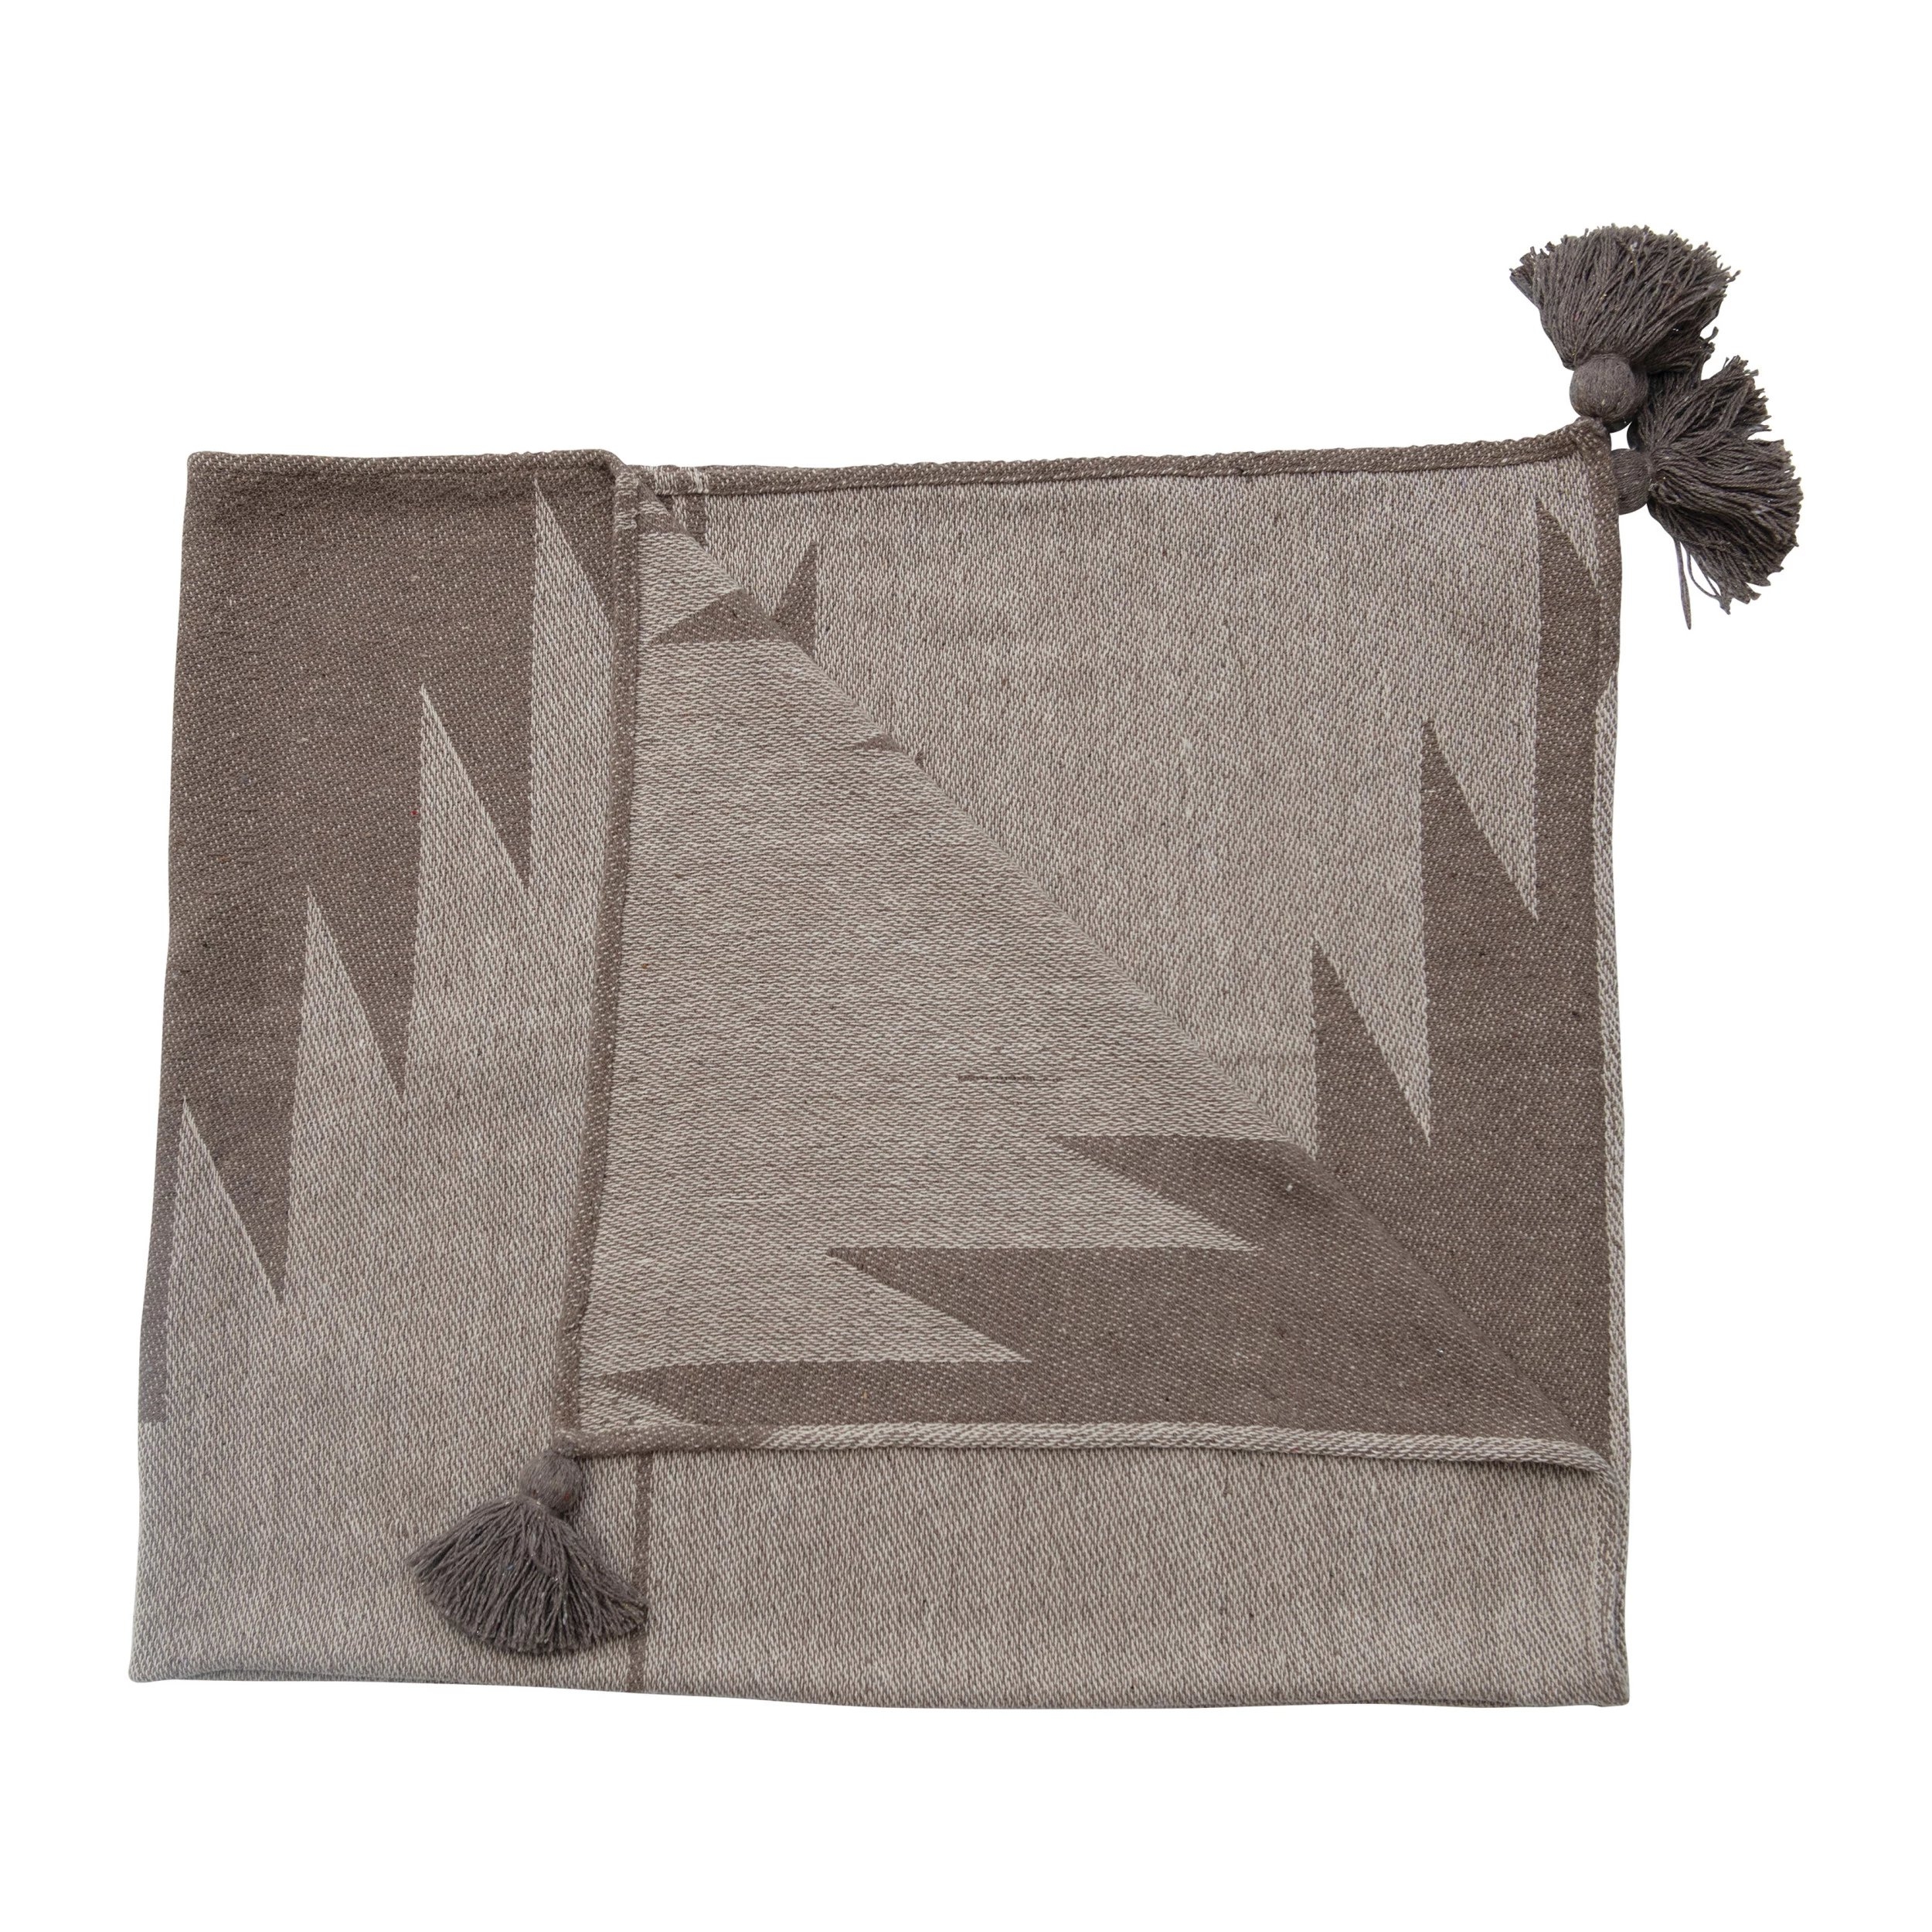 Southwest-Inspired Decorative Woven Recycled Cotton Blend Throw with Neutral Aztec Pattern and Tassels - Image 0